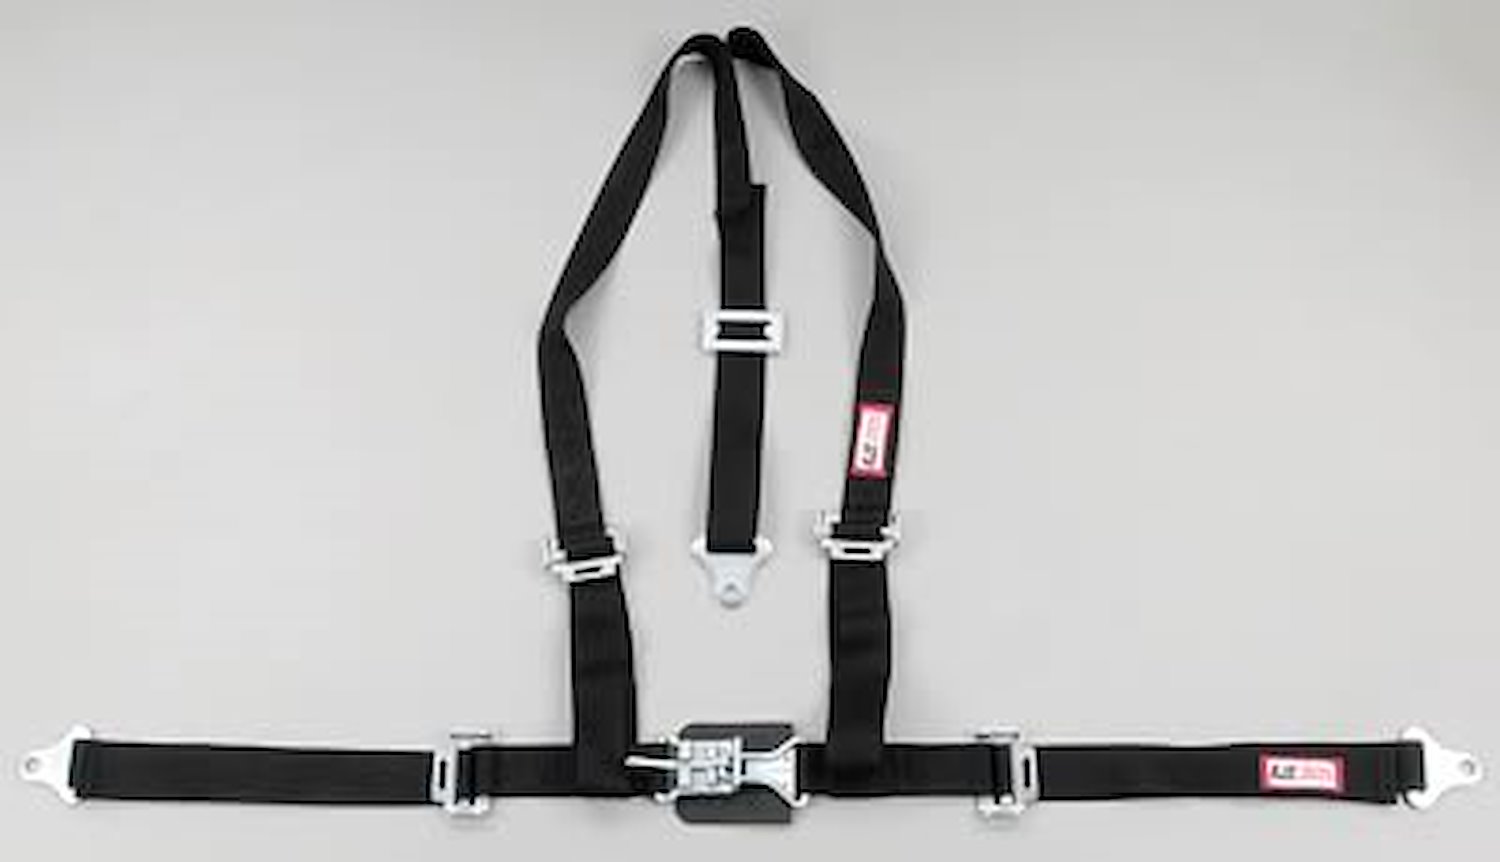 NON-SFI L&L HARNESS 2 PULL UP Lap Belt SEWN IN 2 S.H. INDIVIDUAL FLOOR Mount w/STERNUM STRAP ALL WRAP ENDS BLUE